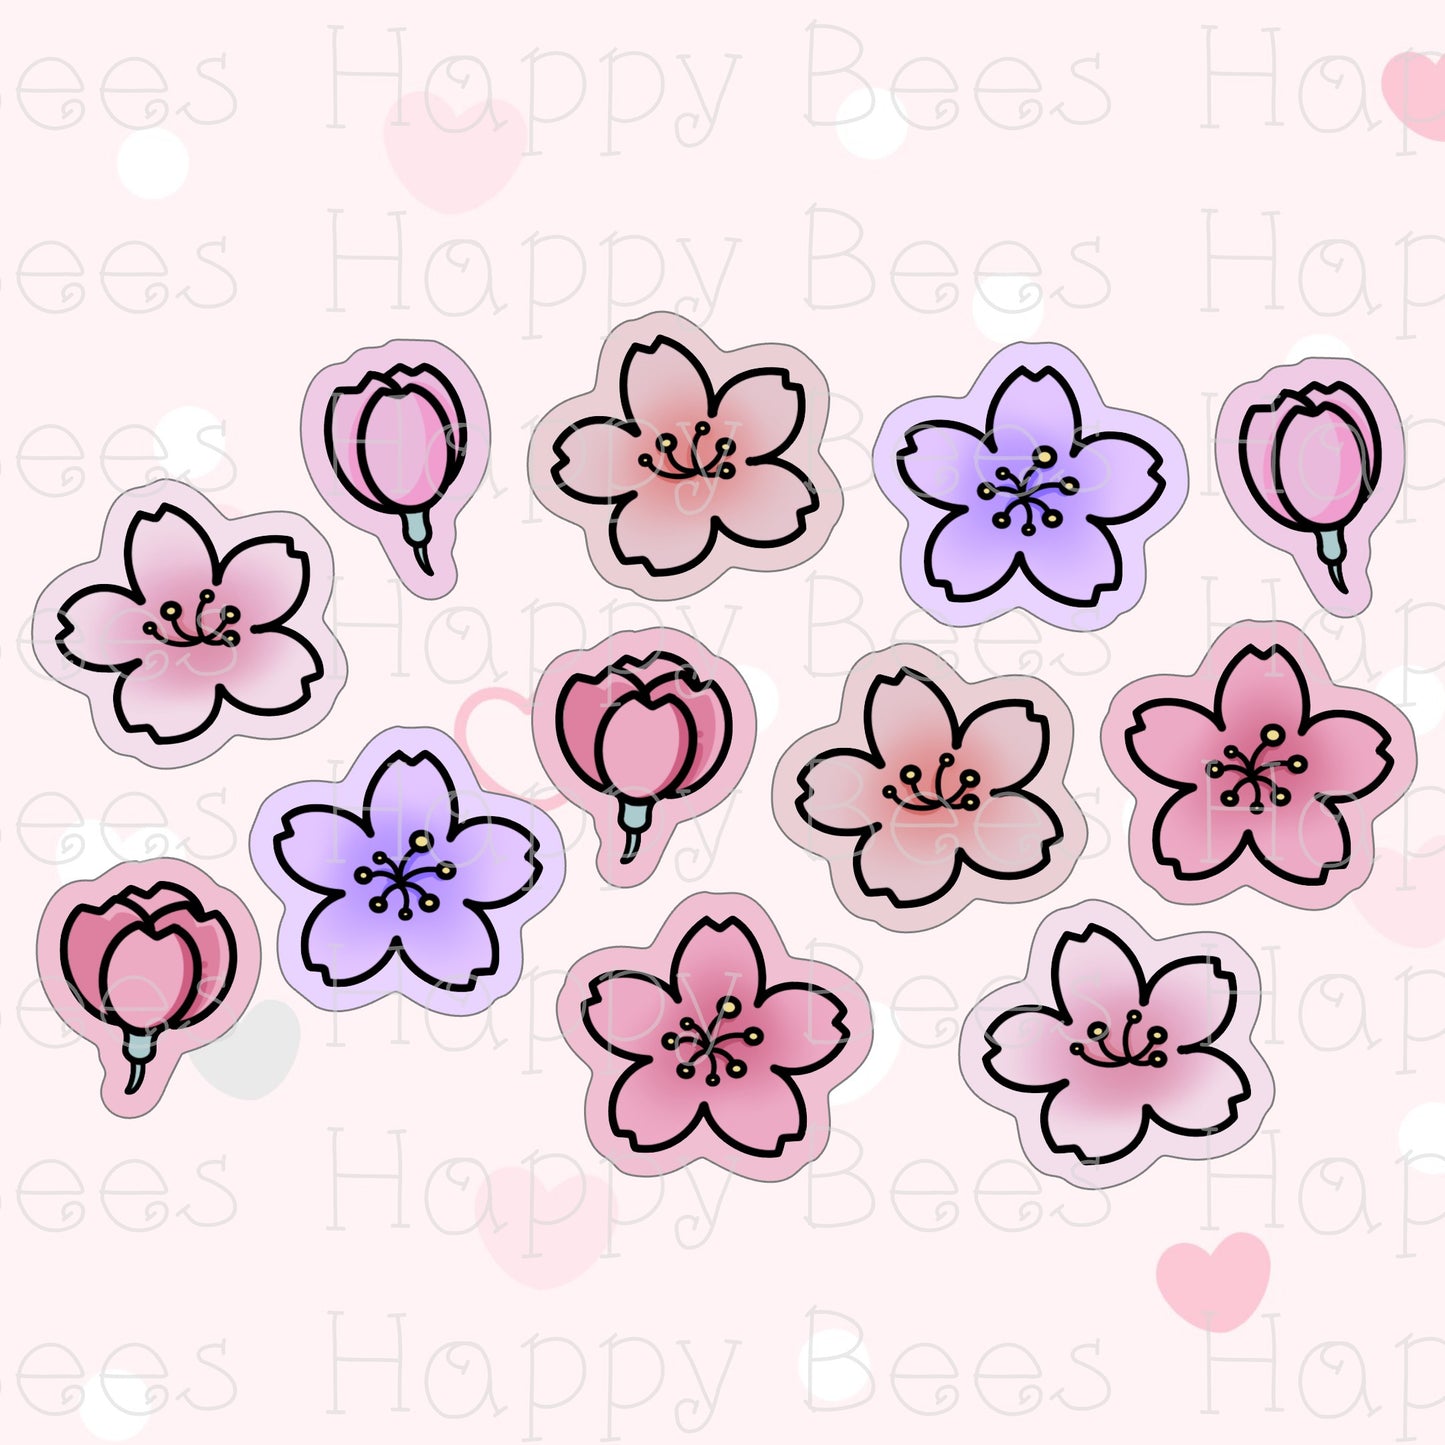 12 pcs Cherry Blossom Flake Stickers - Cute Doodles Bullet Journal Planner Stickers DC10013